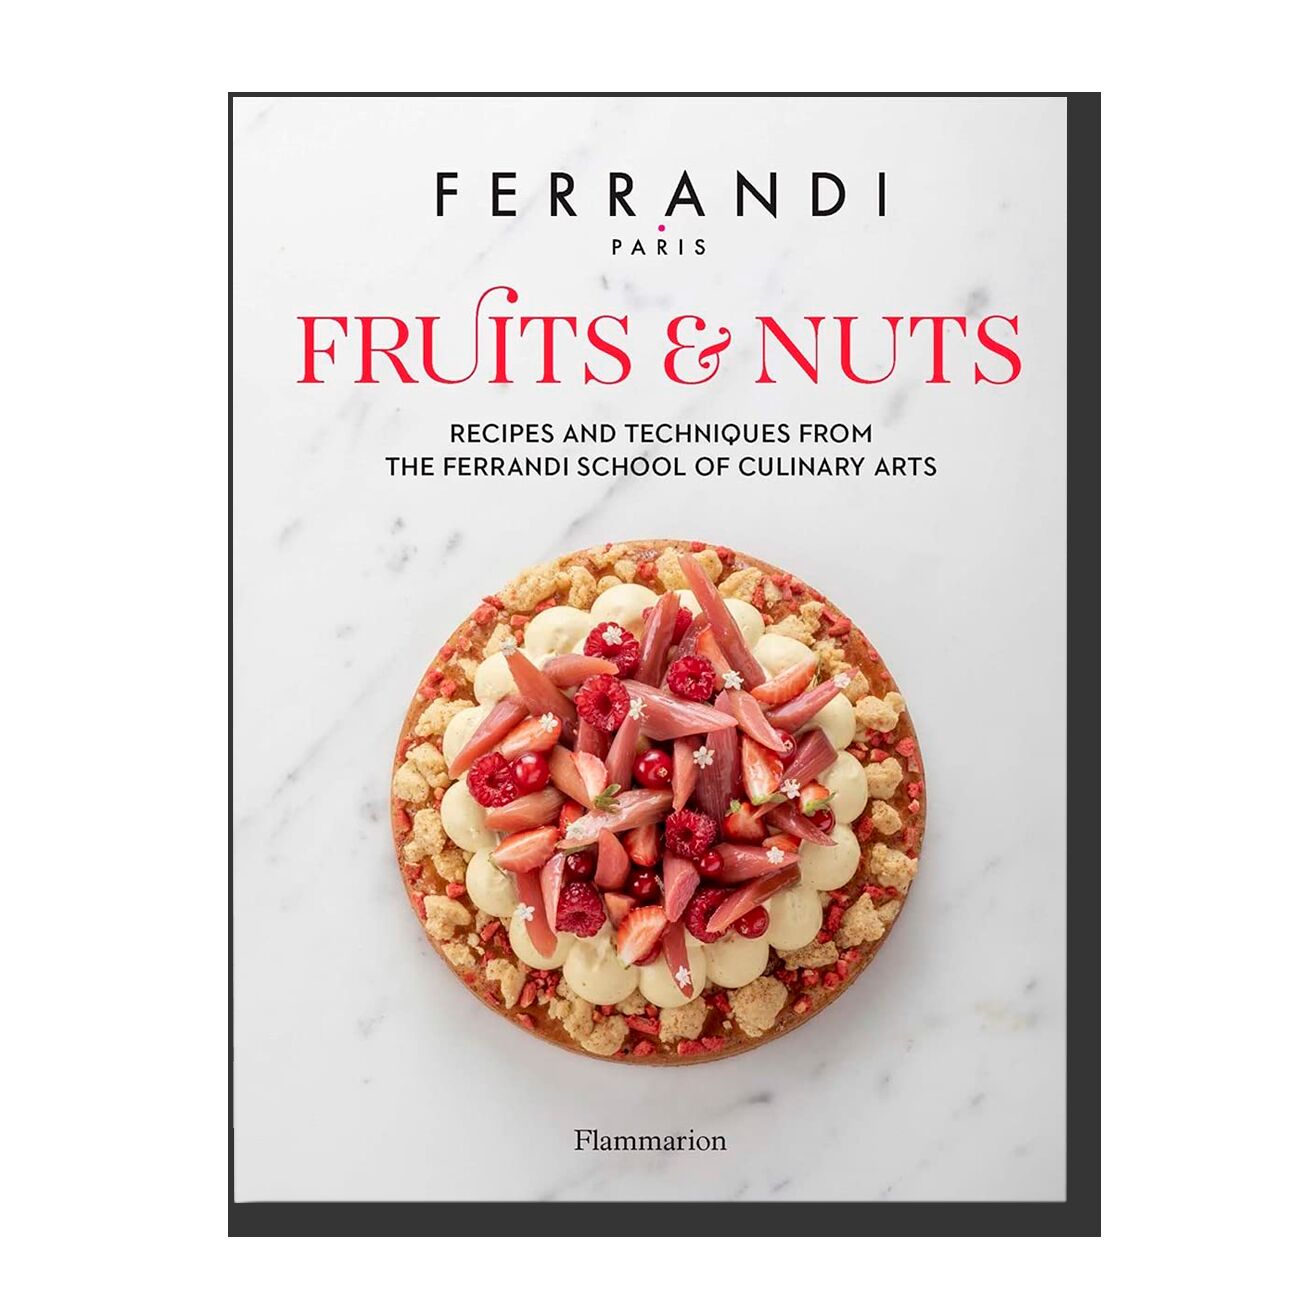 Fruits & Nuts: Recipes and Techniques from the Ferrandi School of Culinary Arts